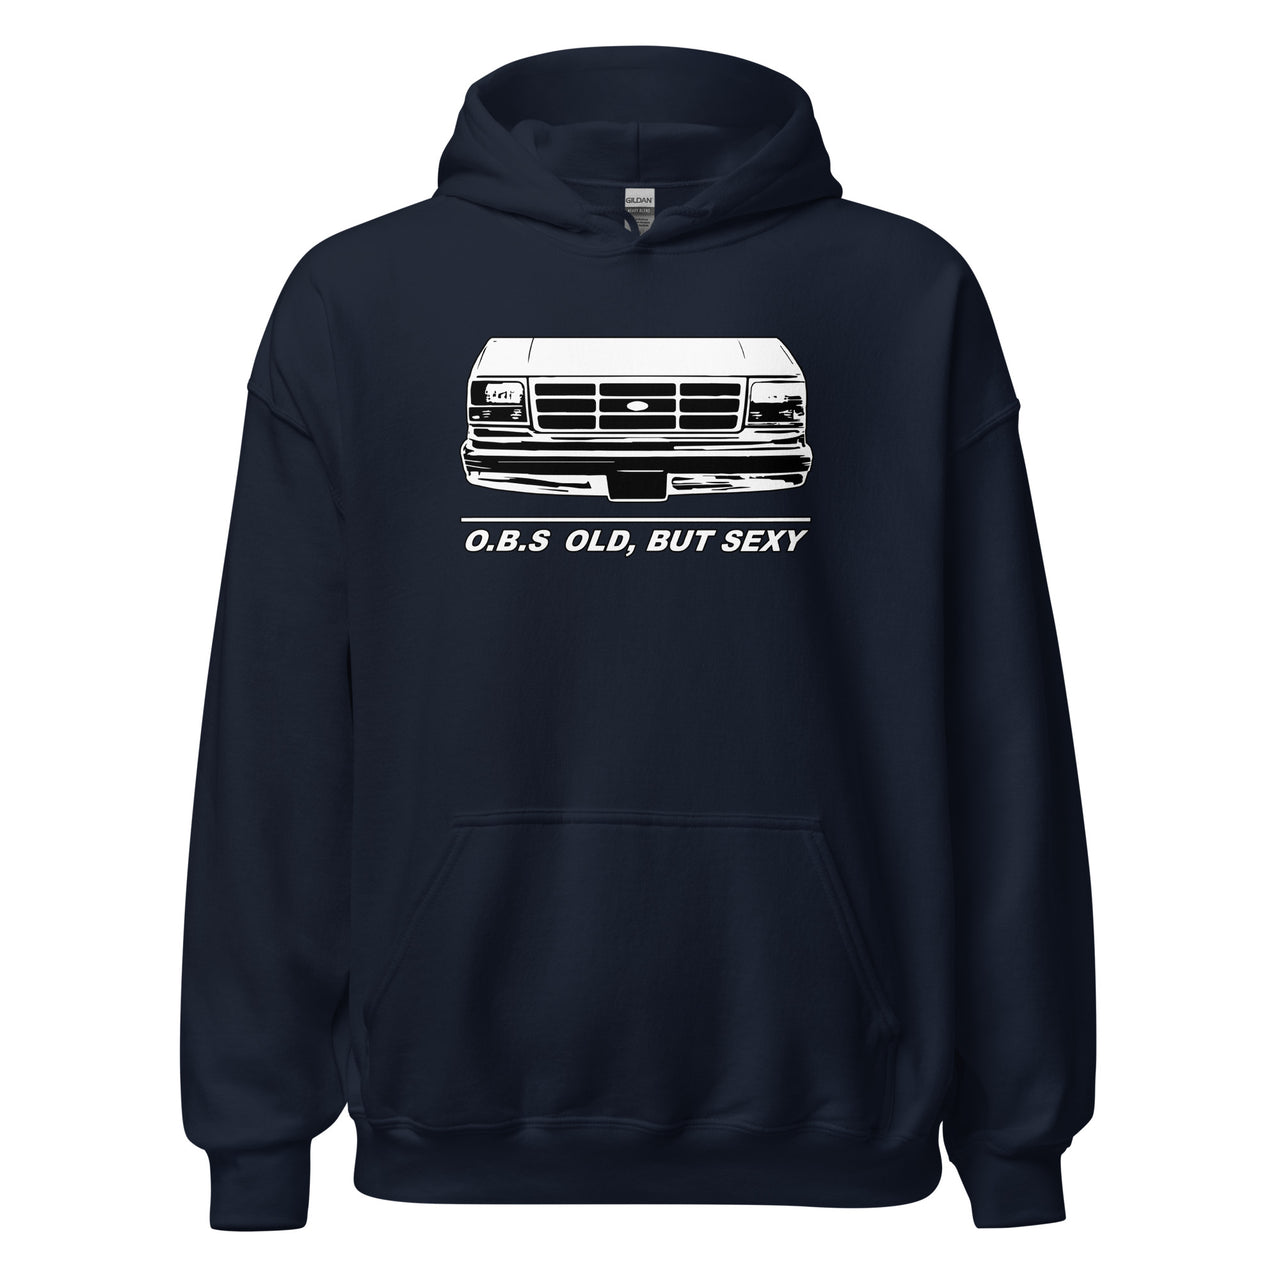 OBS Truck - Old, But Sexy Hoodie in navy